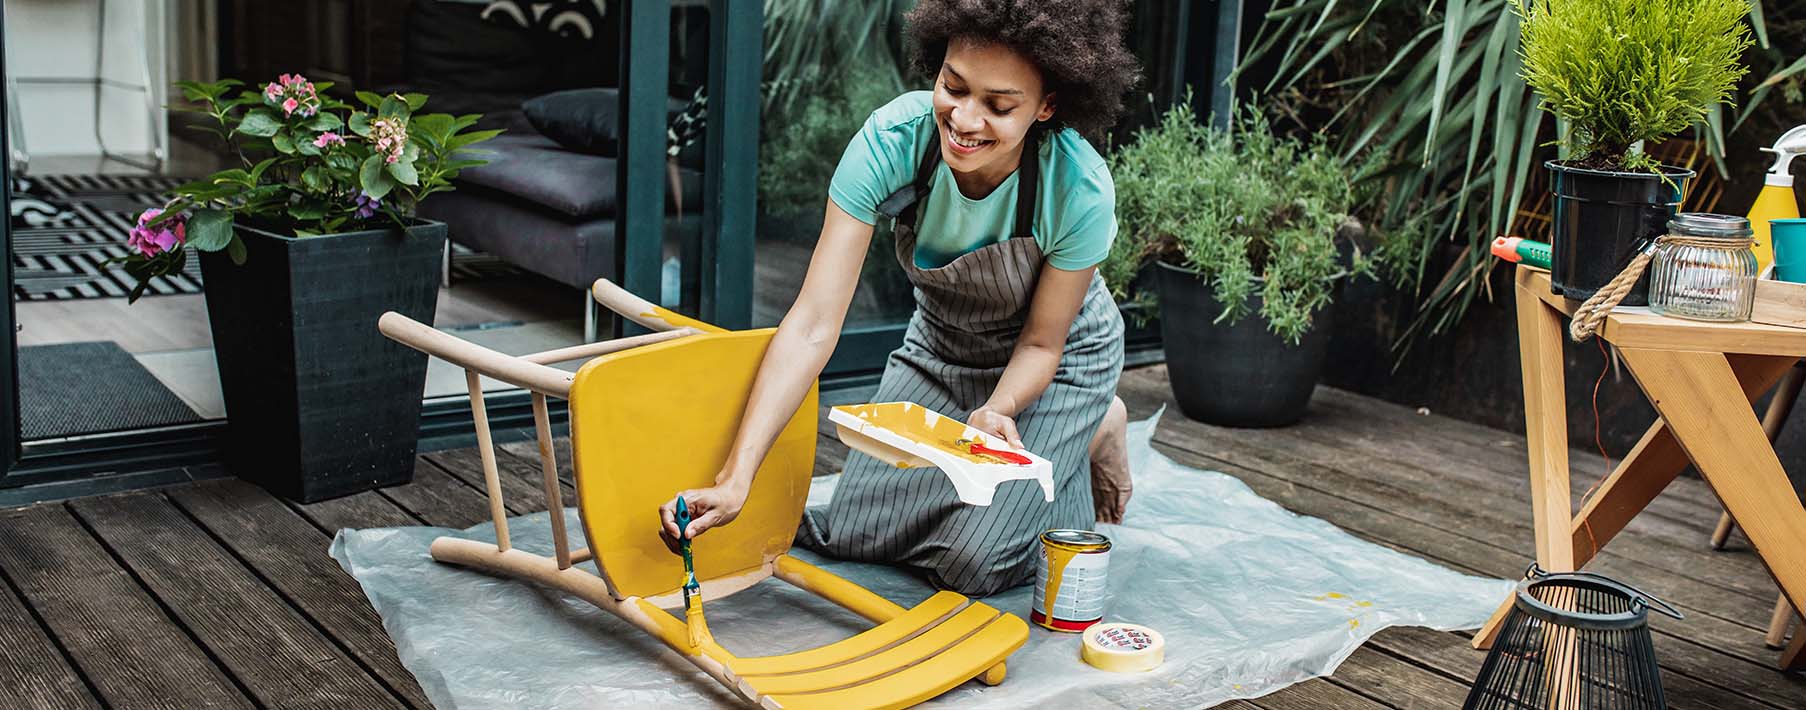 A woman paints a chair yellow on her wooden deck